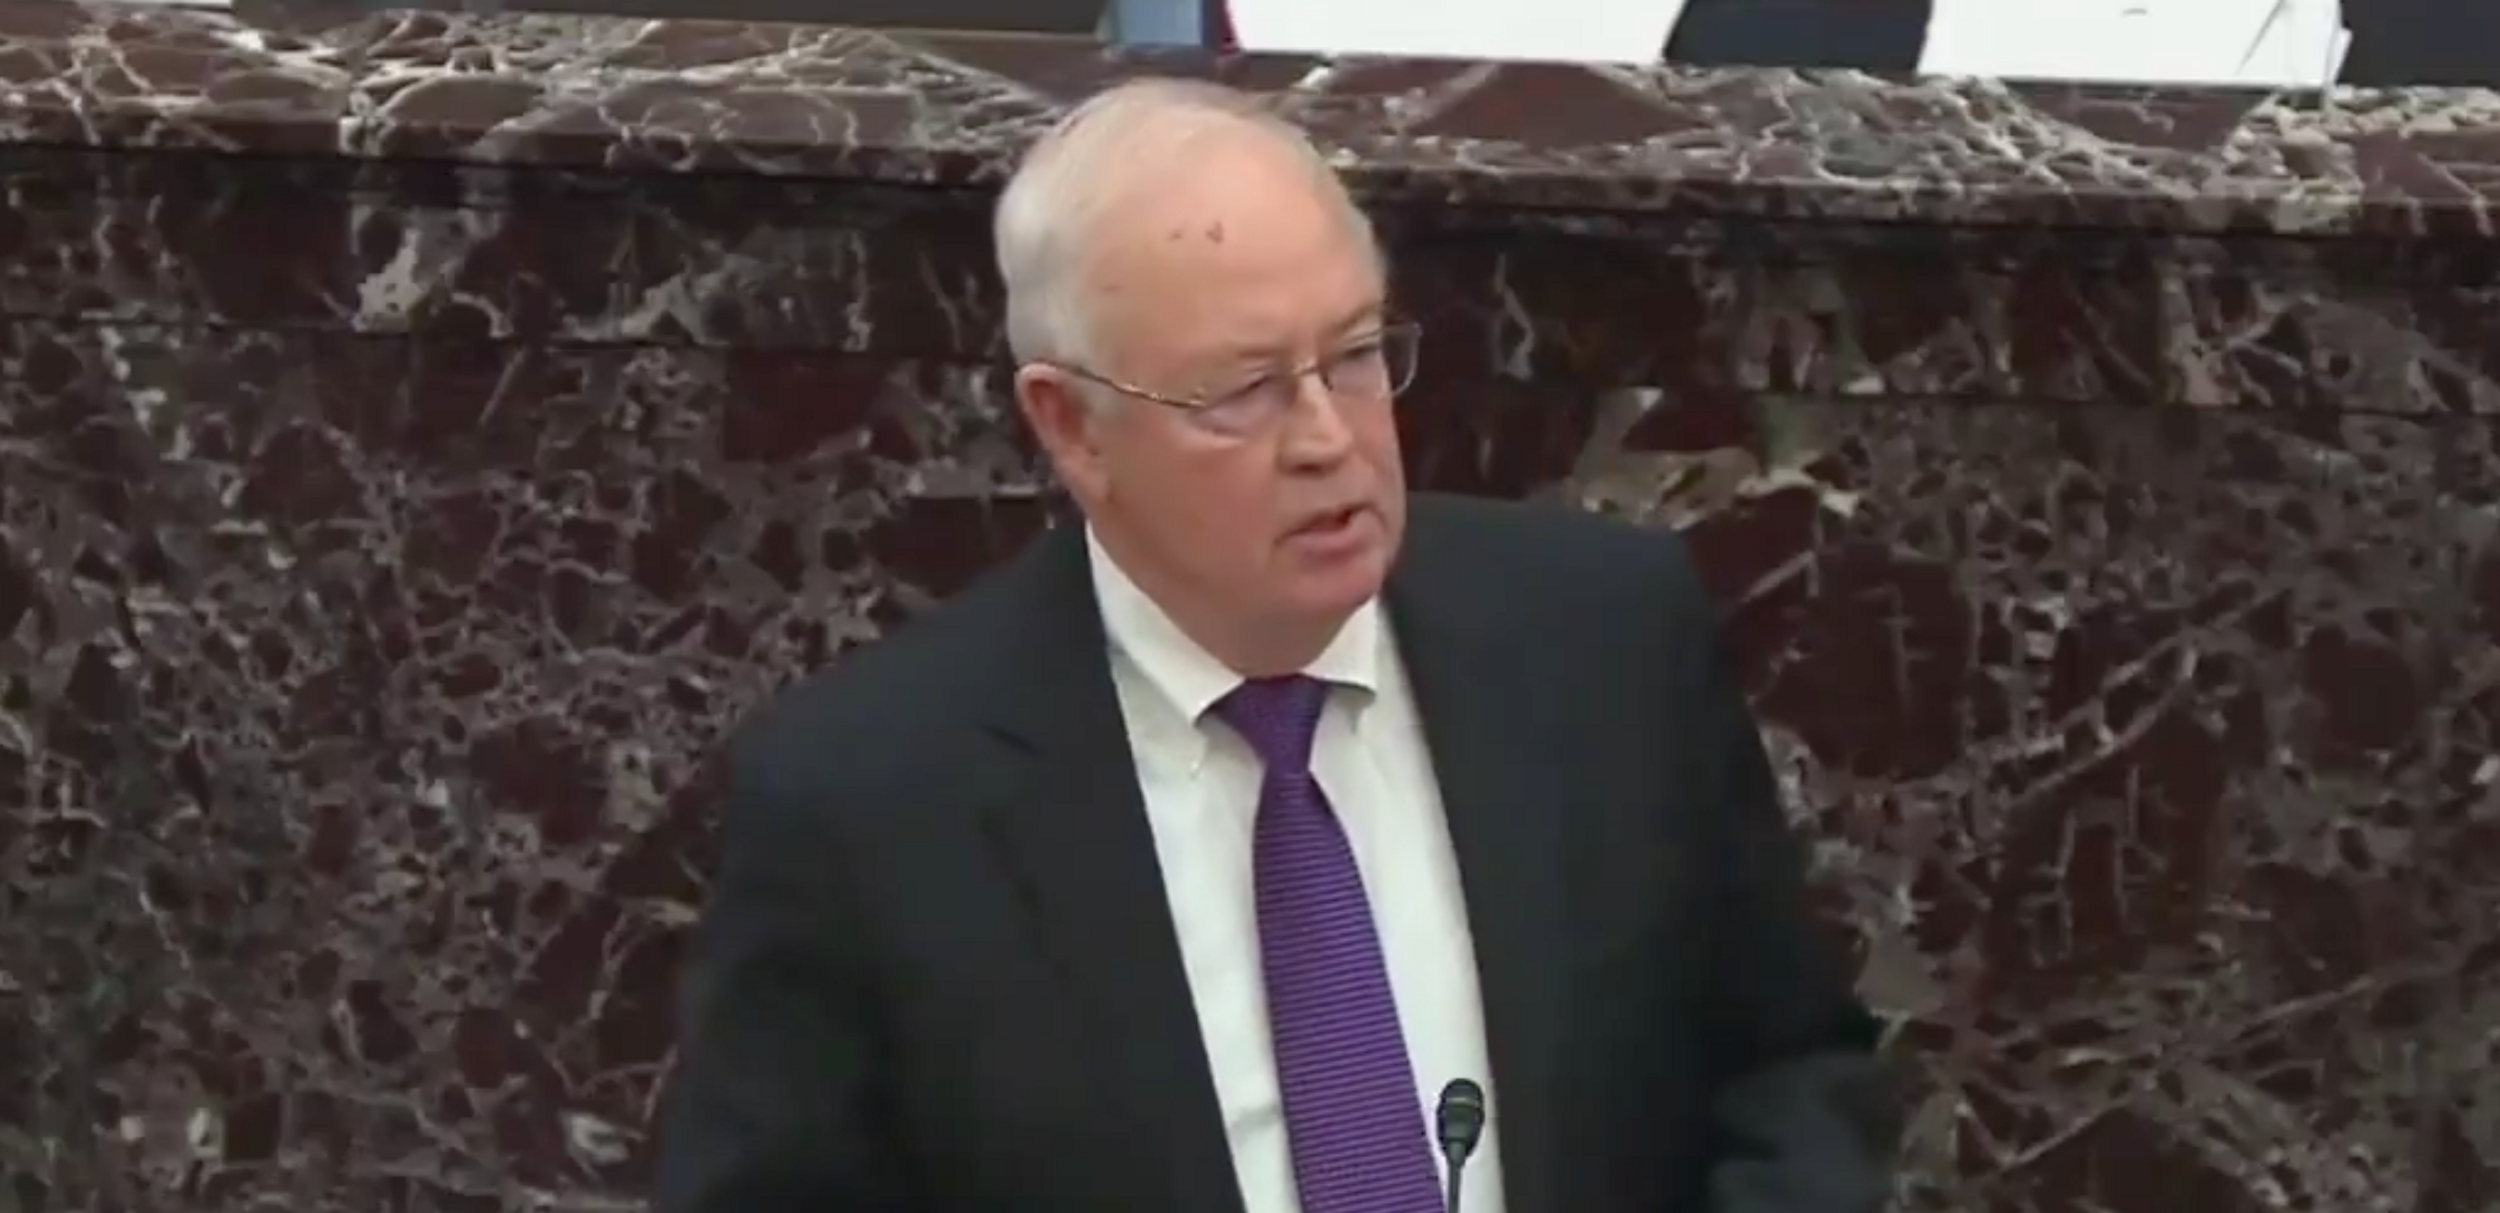 Ken Starr Defended Trump by Complaining About Frivolous Impeachments, So Someone Added a Laugh Track and It's Perfect